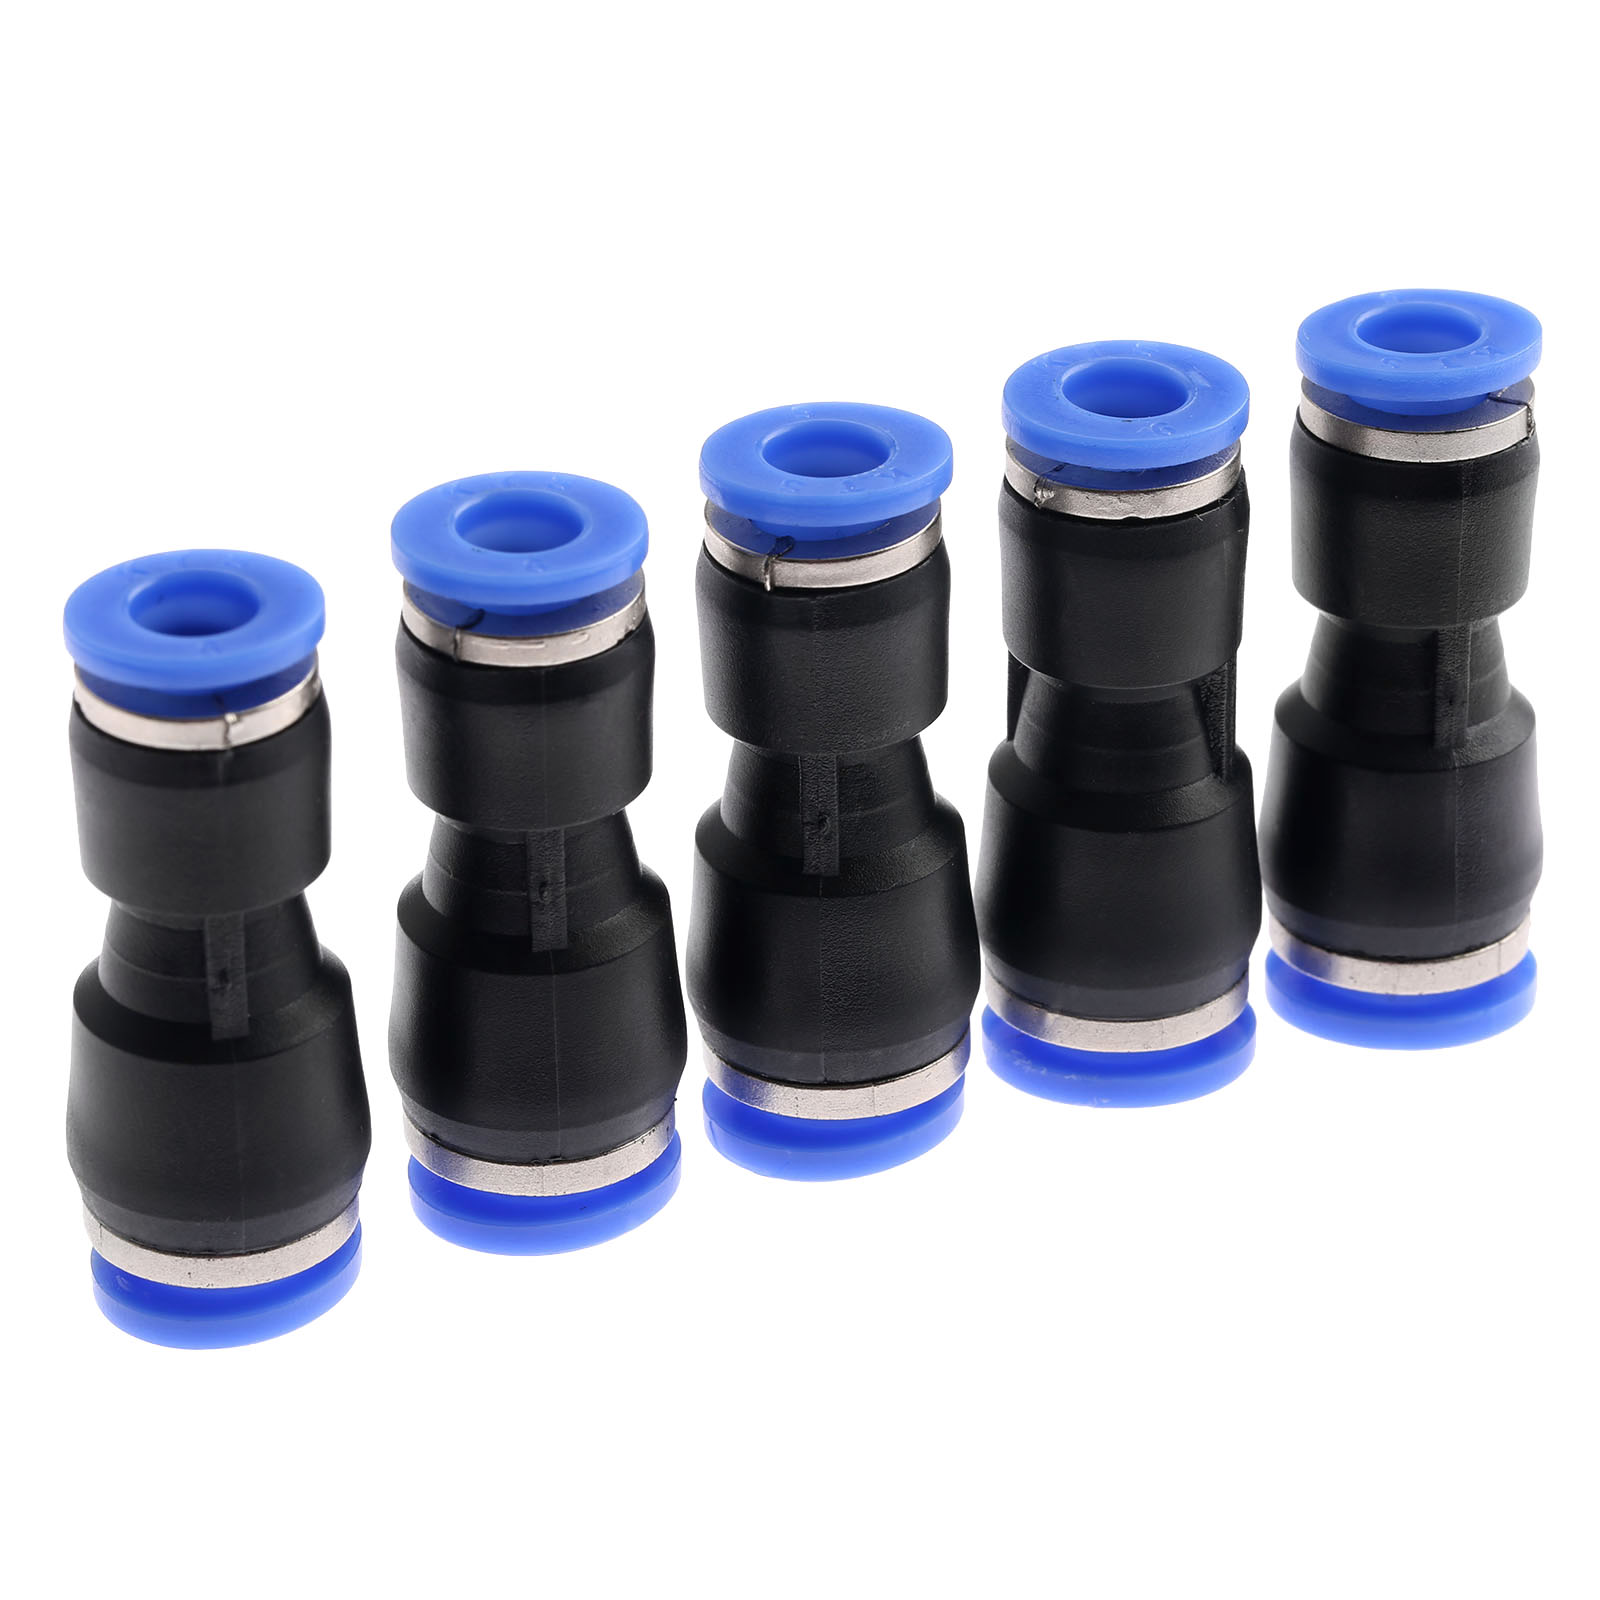 5Pcs Pneumatic Fittings Push In Straight Reducer Connectors For Air Water Hose Plastic Pneumatic Parts PG8-6 8mm Hole to 6mm